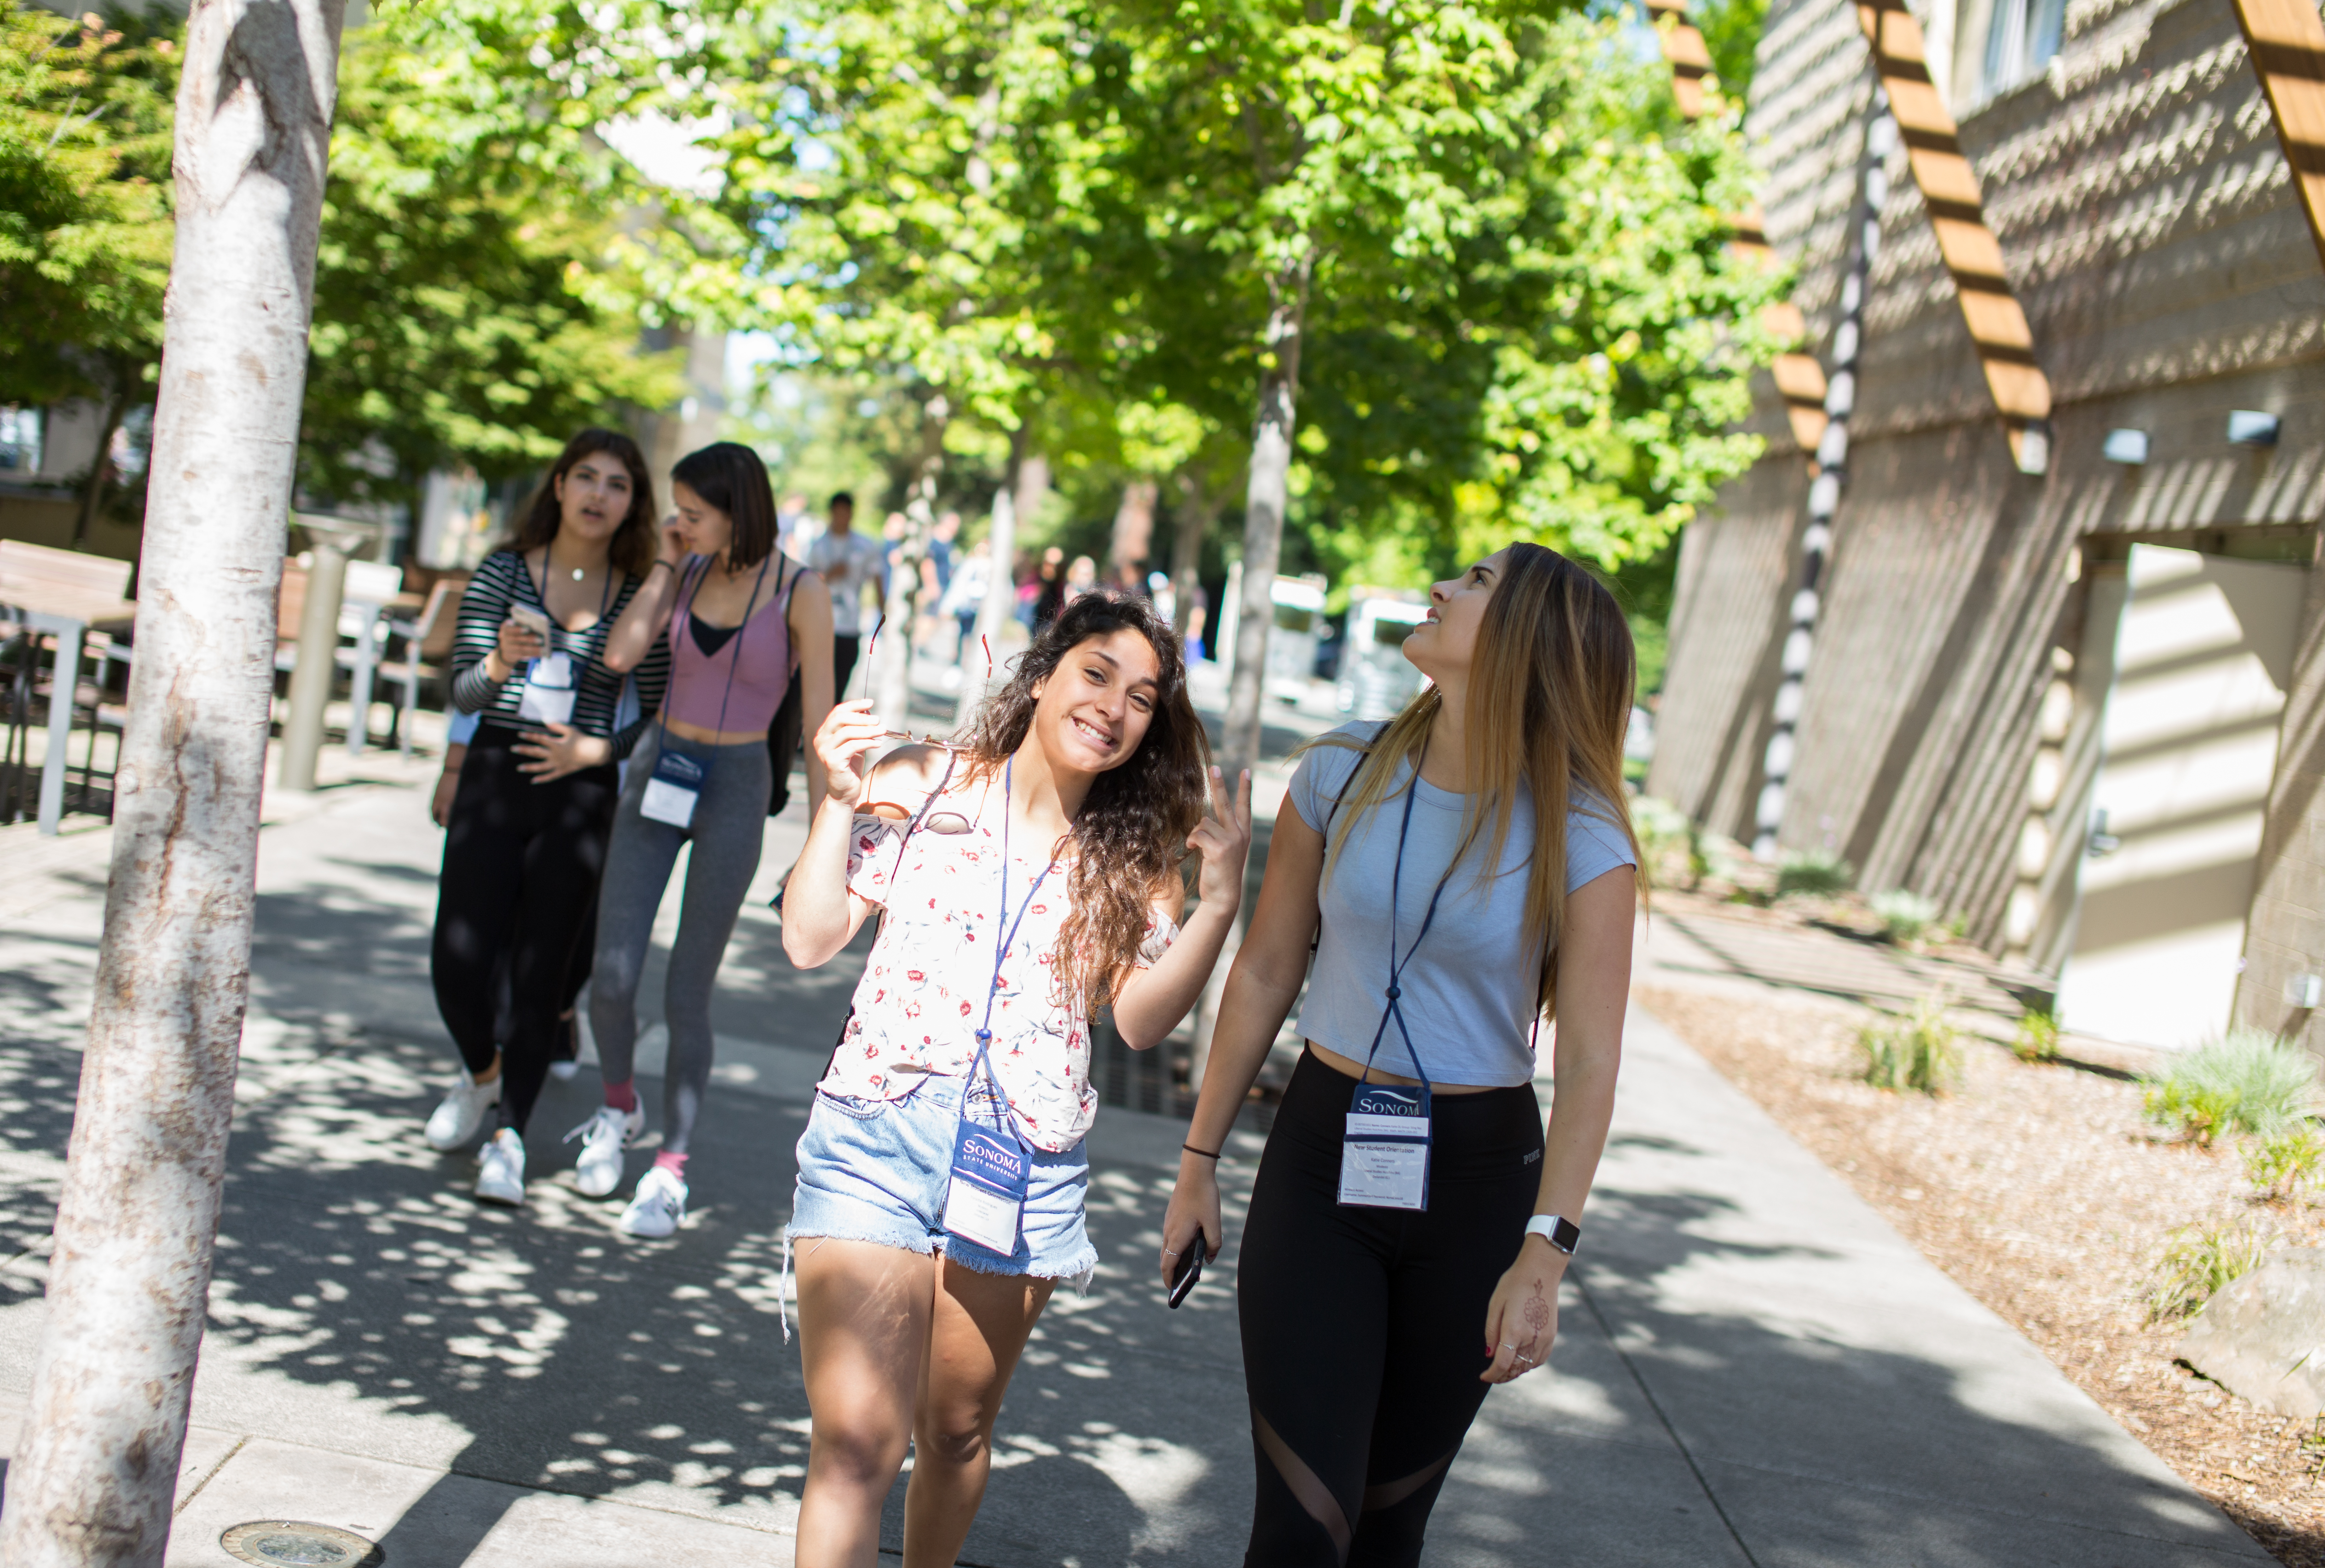 Two students explore campus at Orientation